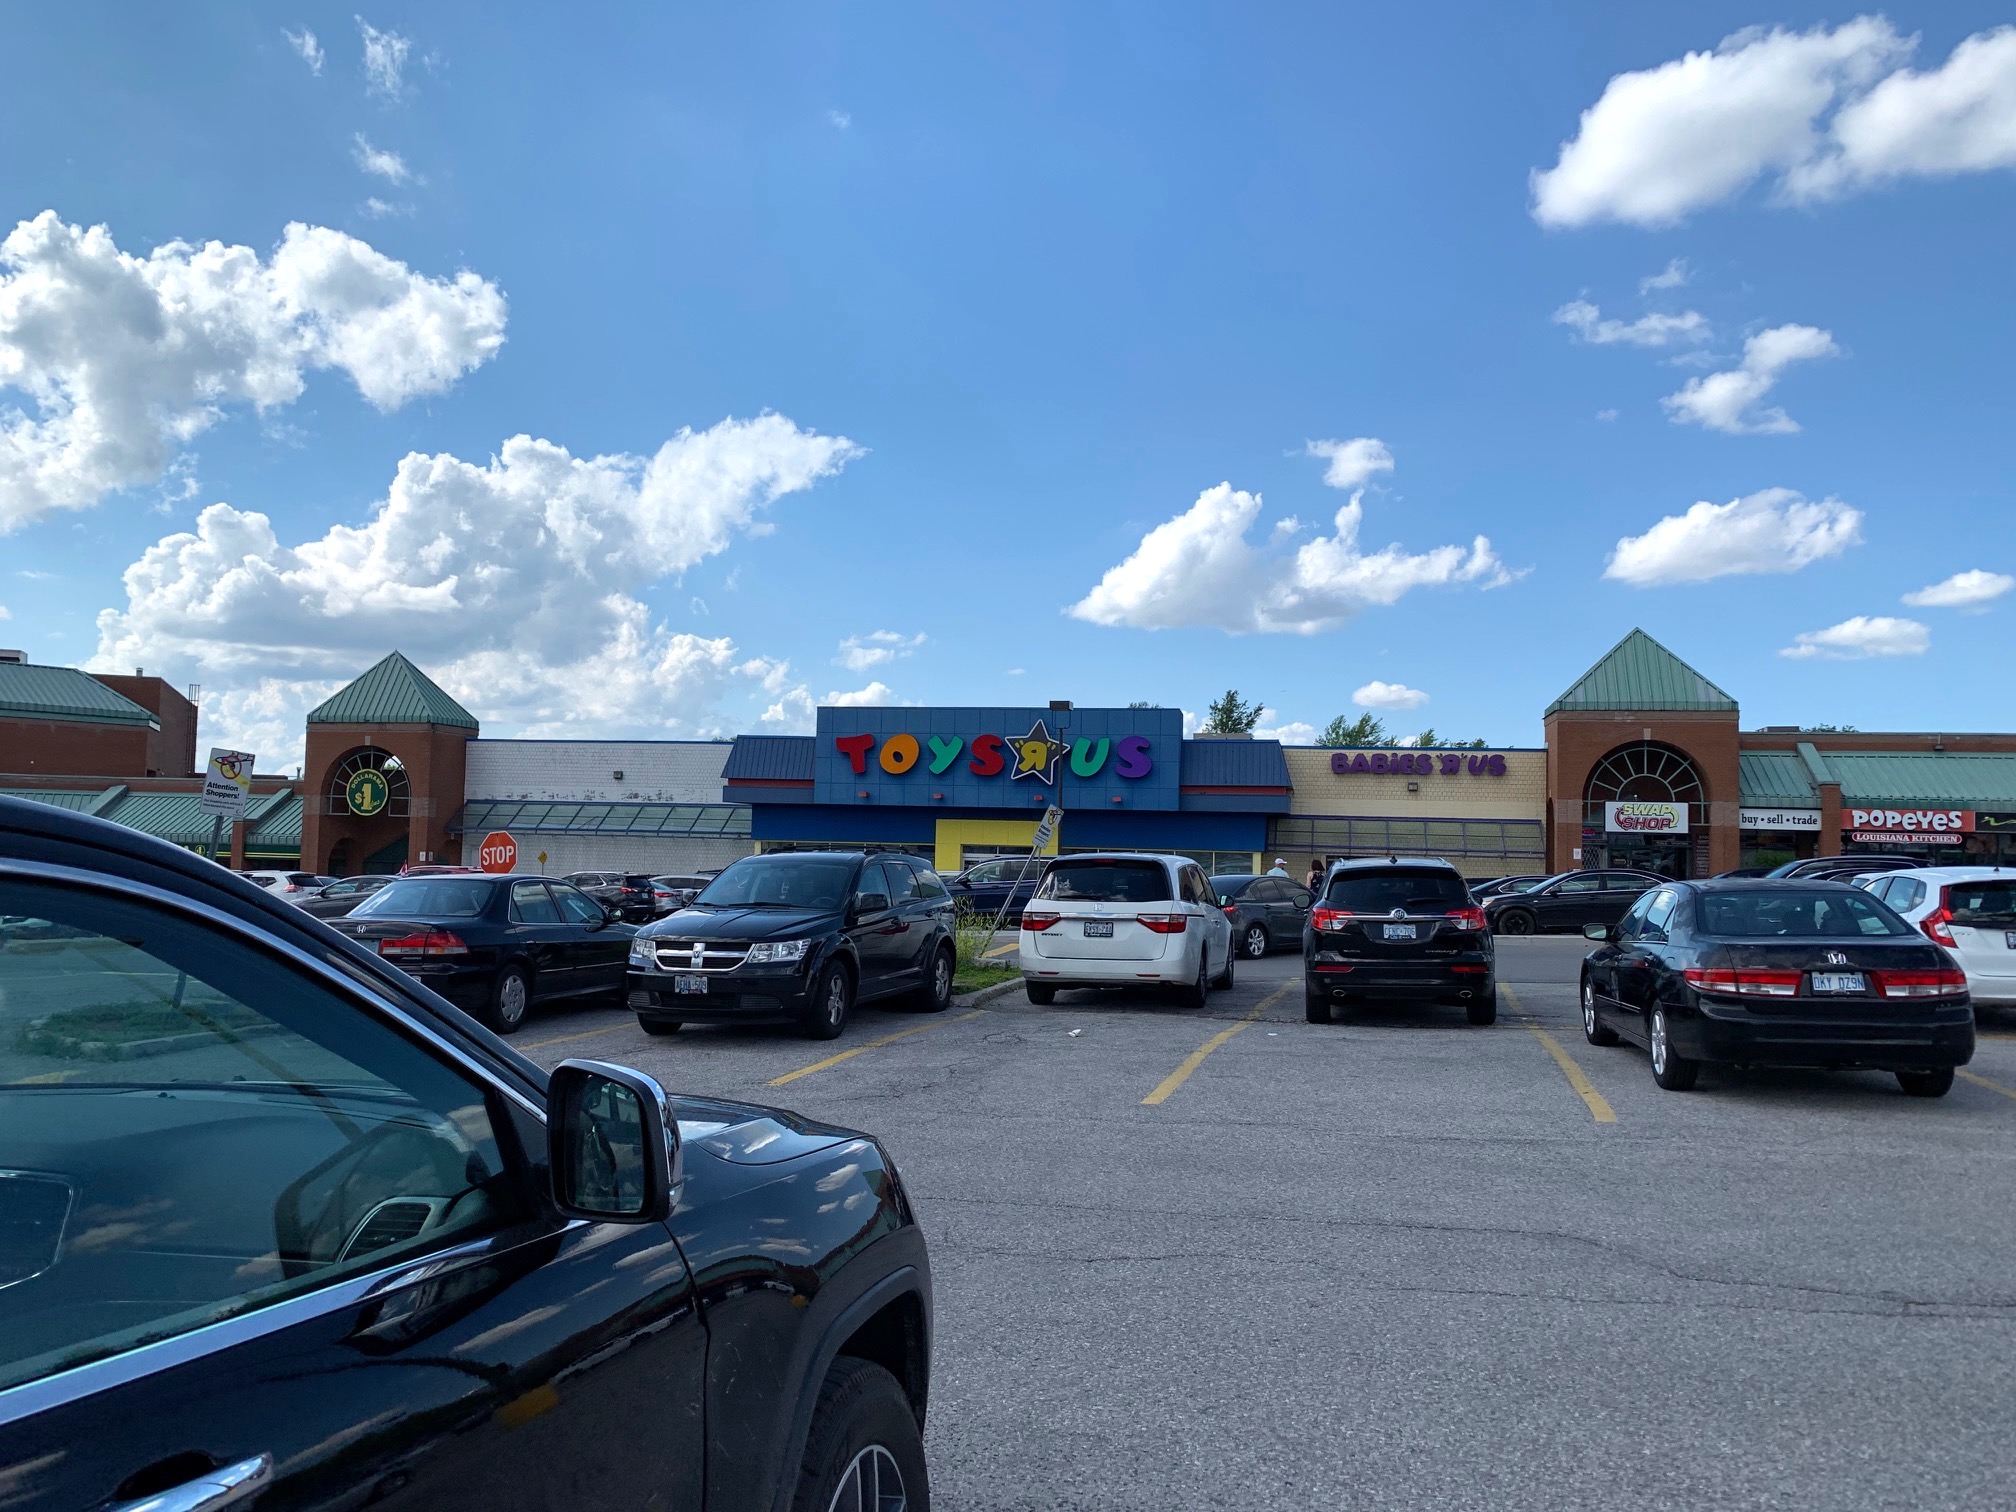 The jackpot - located in a relatively ordinary looking Toys R' Us store 20 minutes drive outside of the city. Stock locators on big box retailers websites can be your friend!